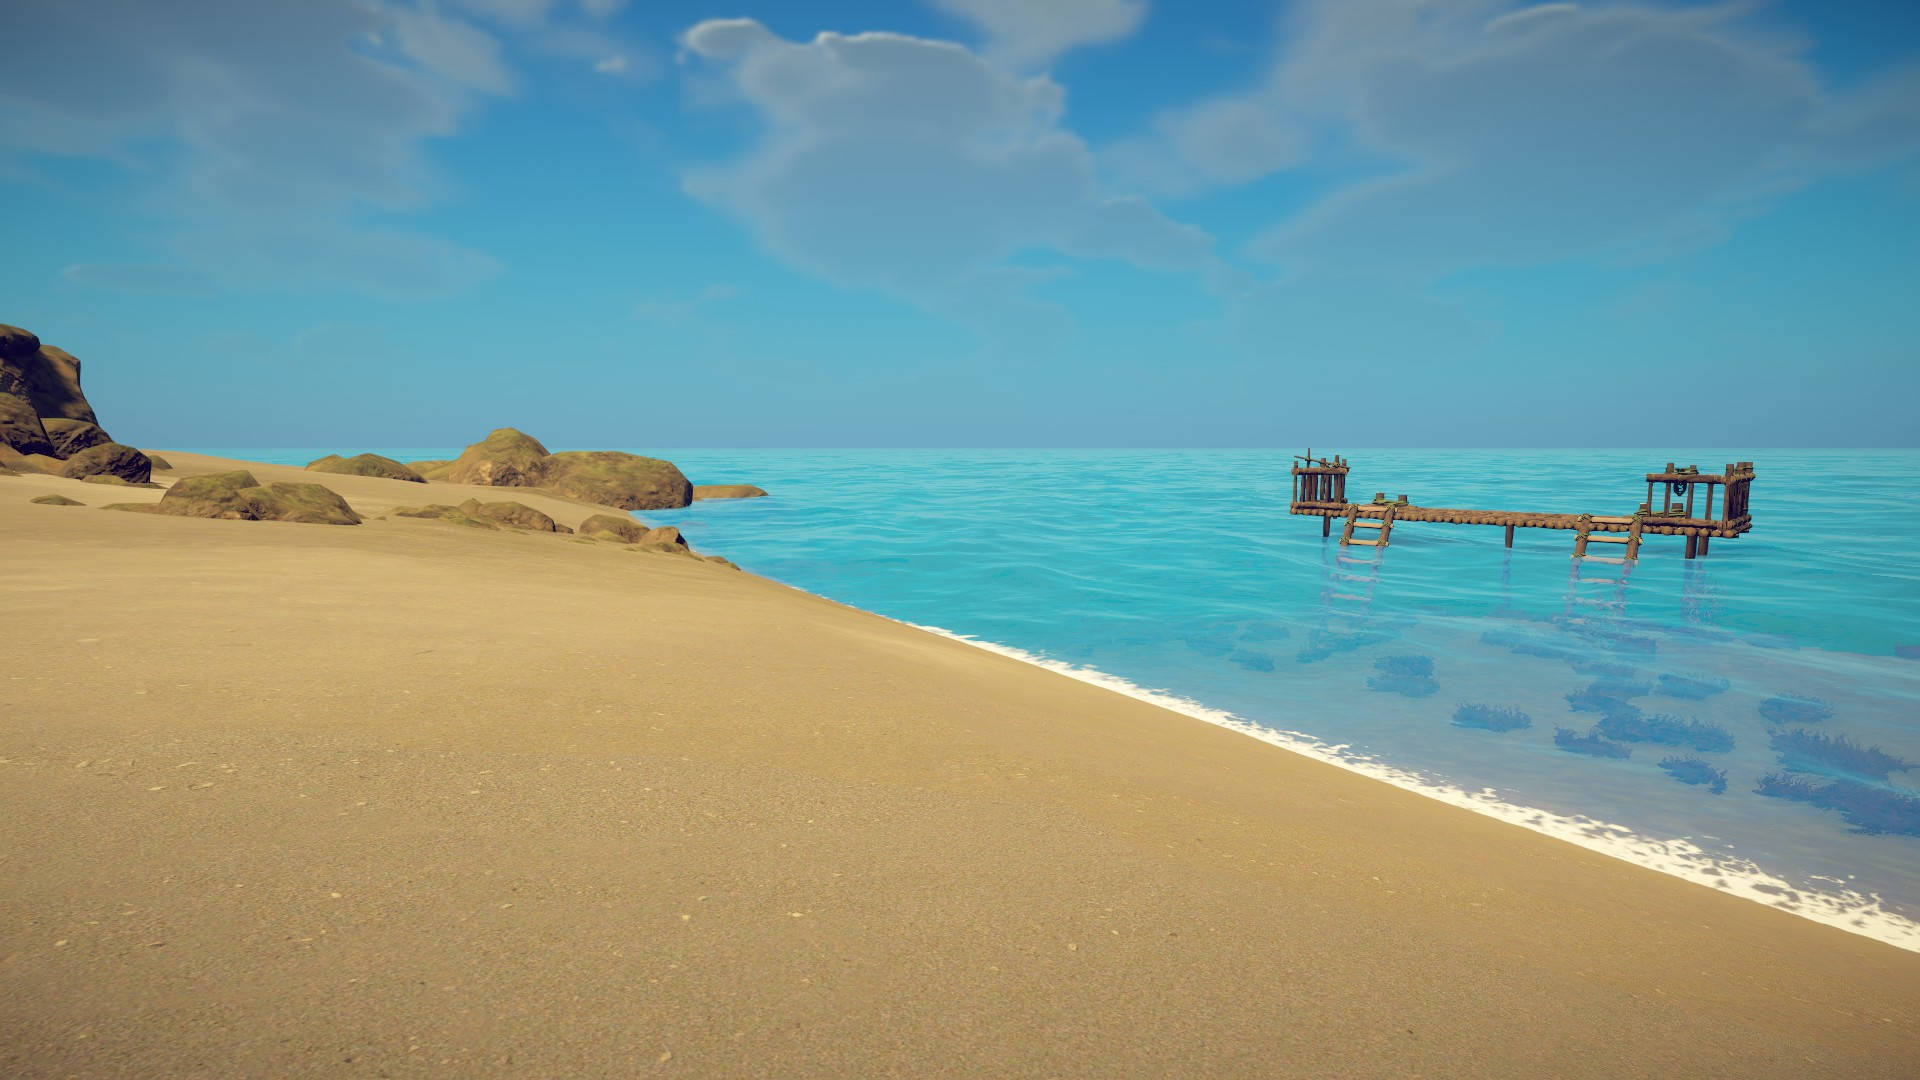 Survival: Fountain of Youth Survival Abilities and Skills Guide - A Dock Just Off the Shore on the Island of Hope